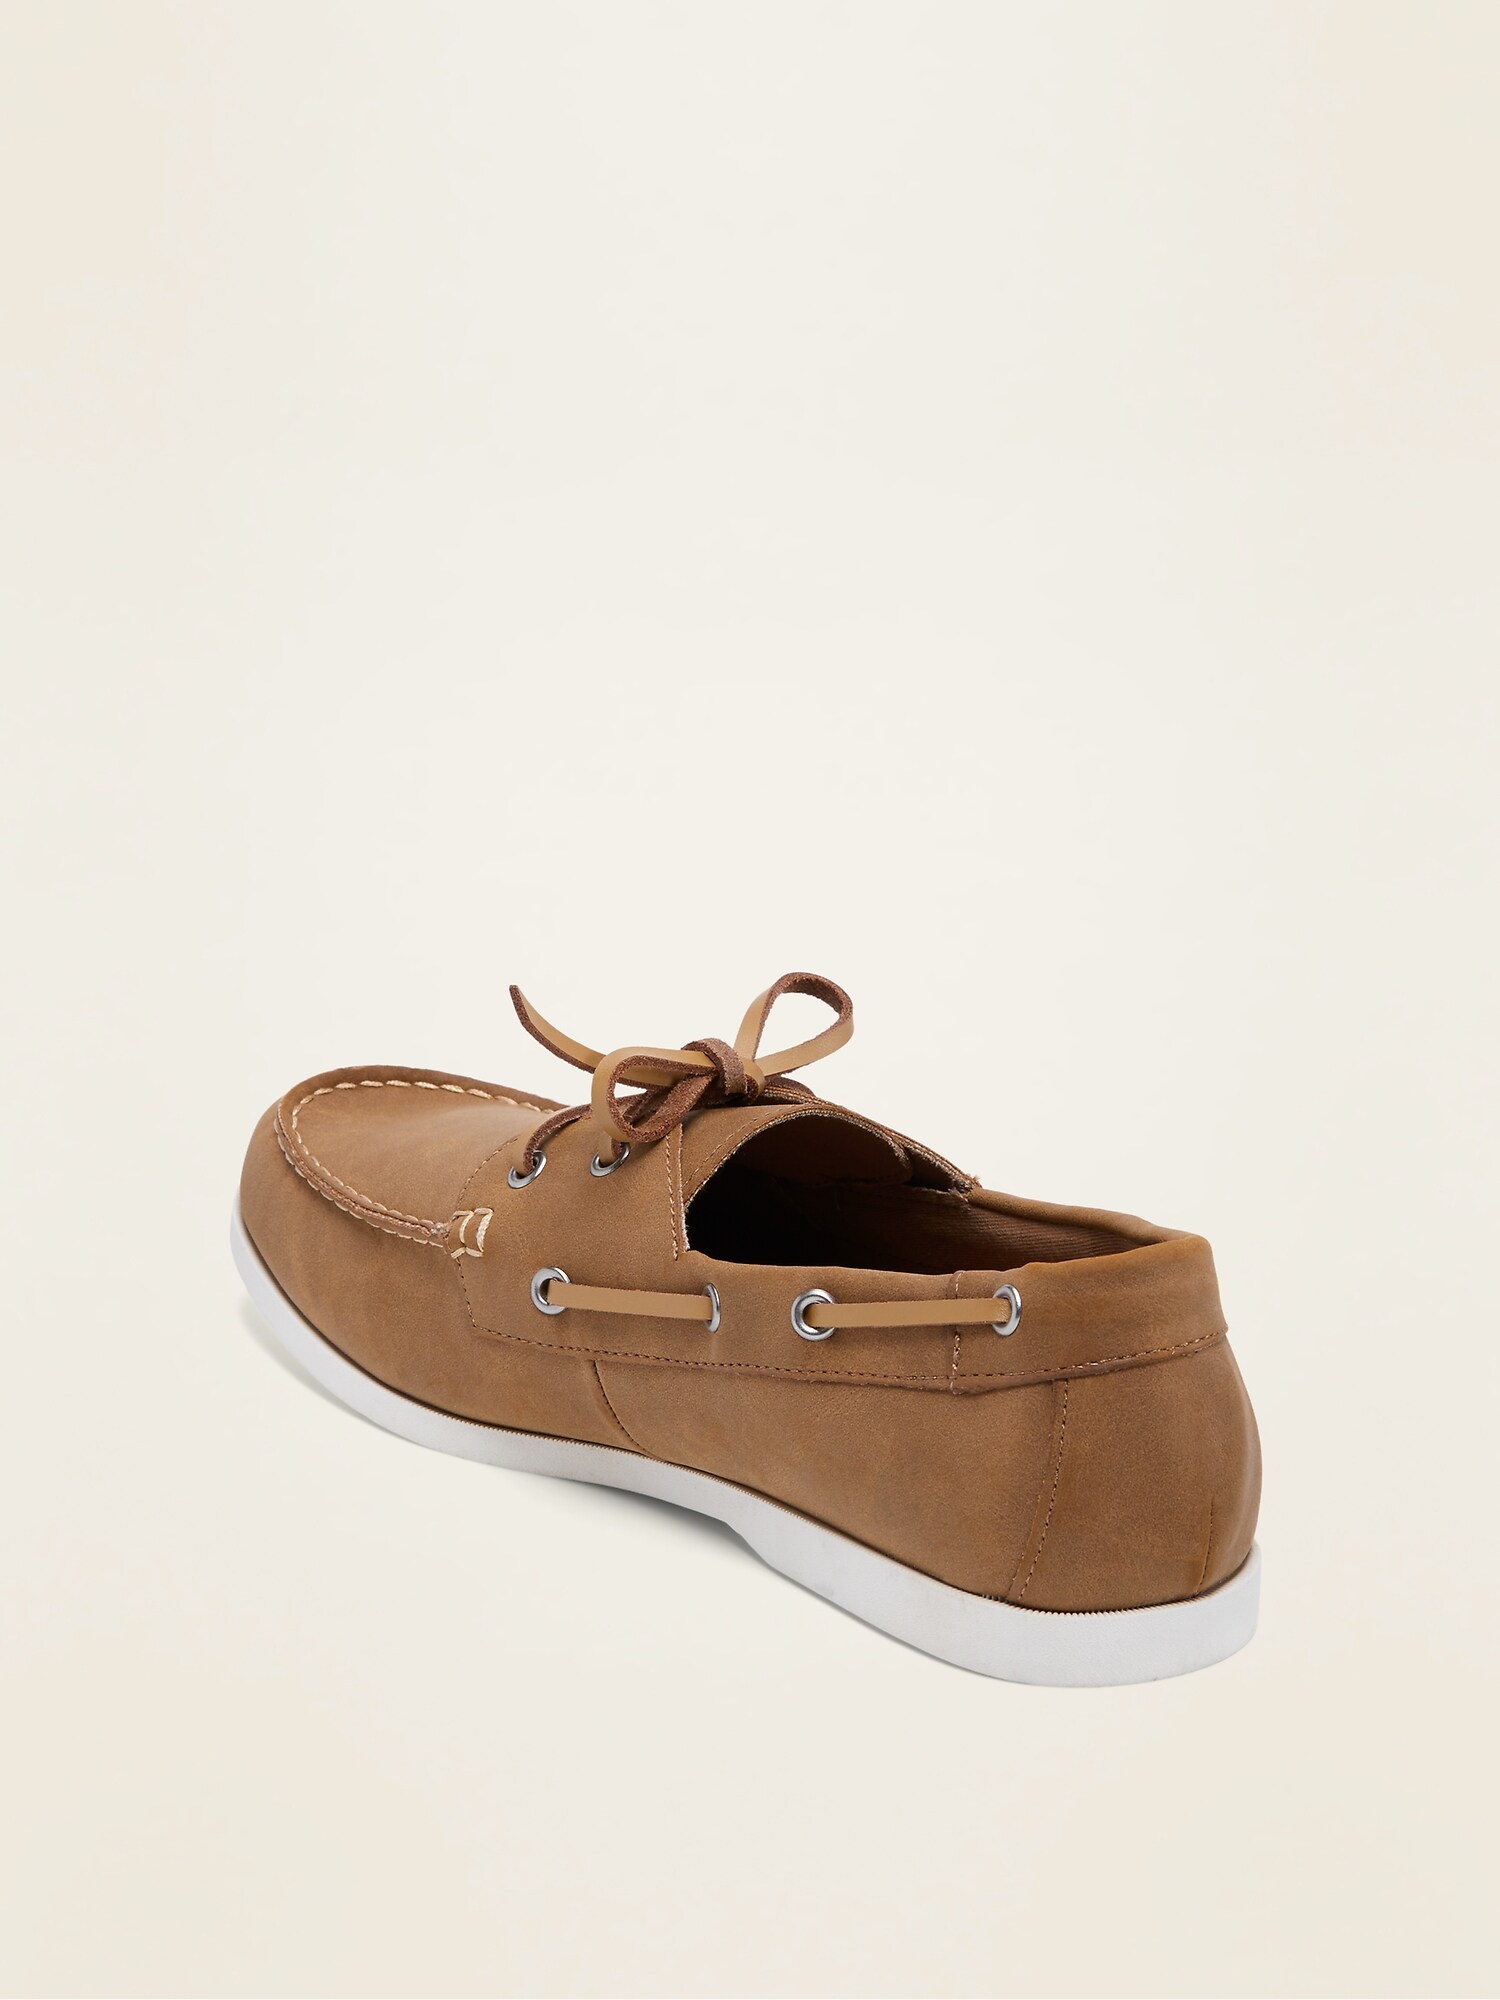 Faux-Leather Boat Shoes for Men | Old Navy